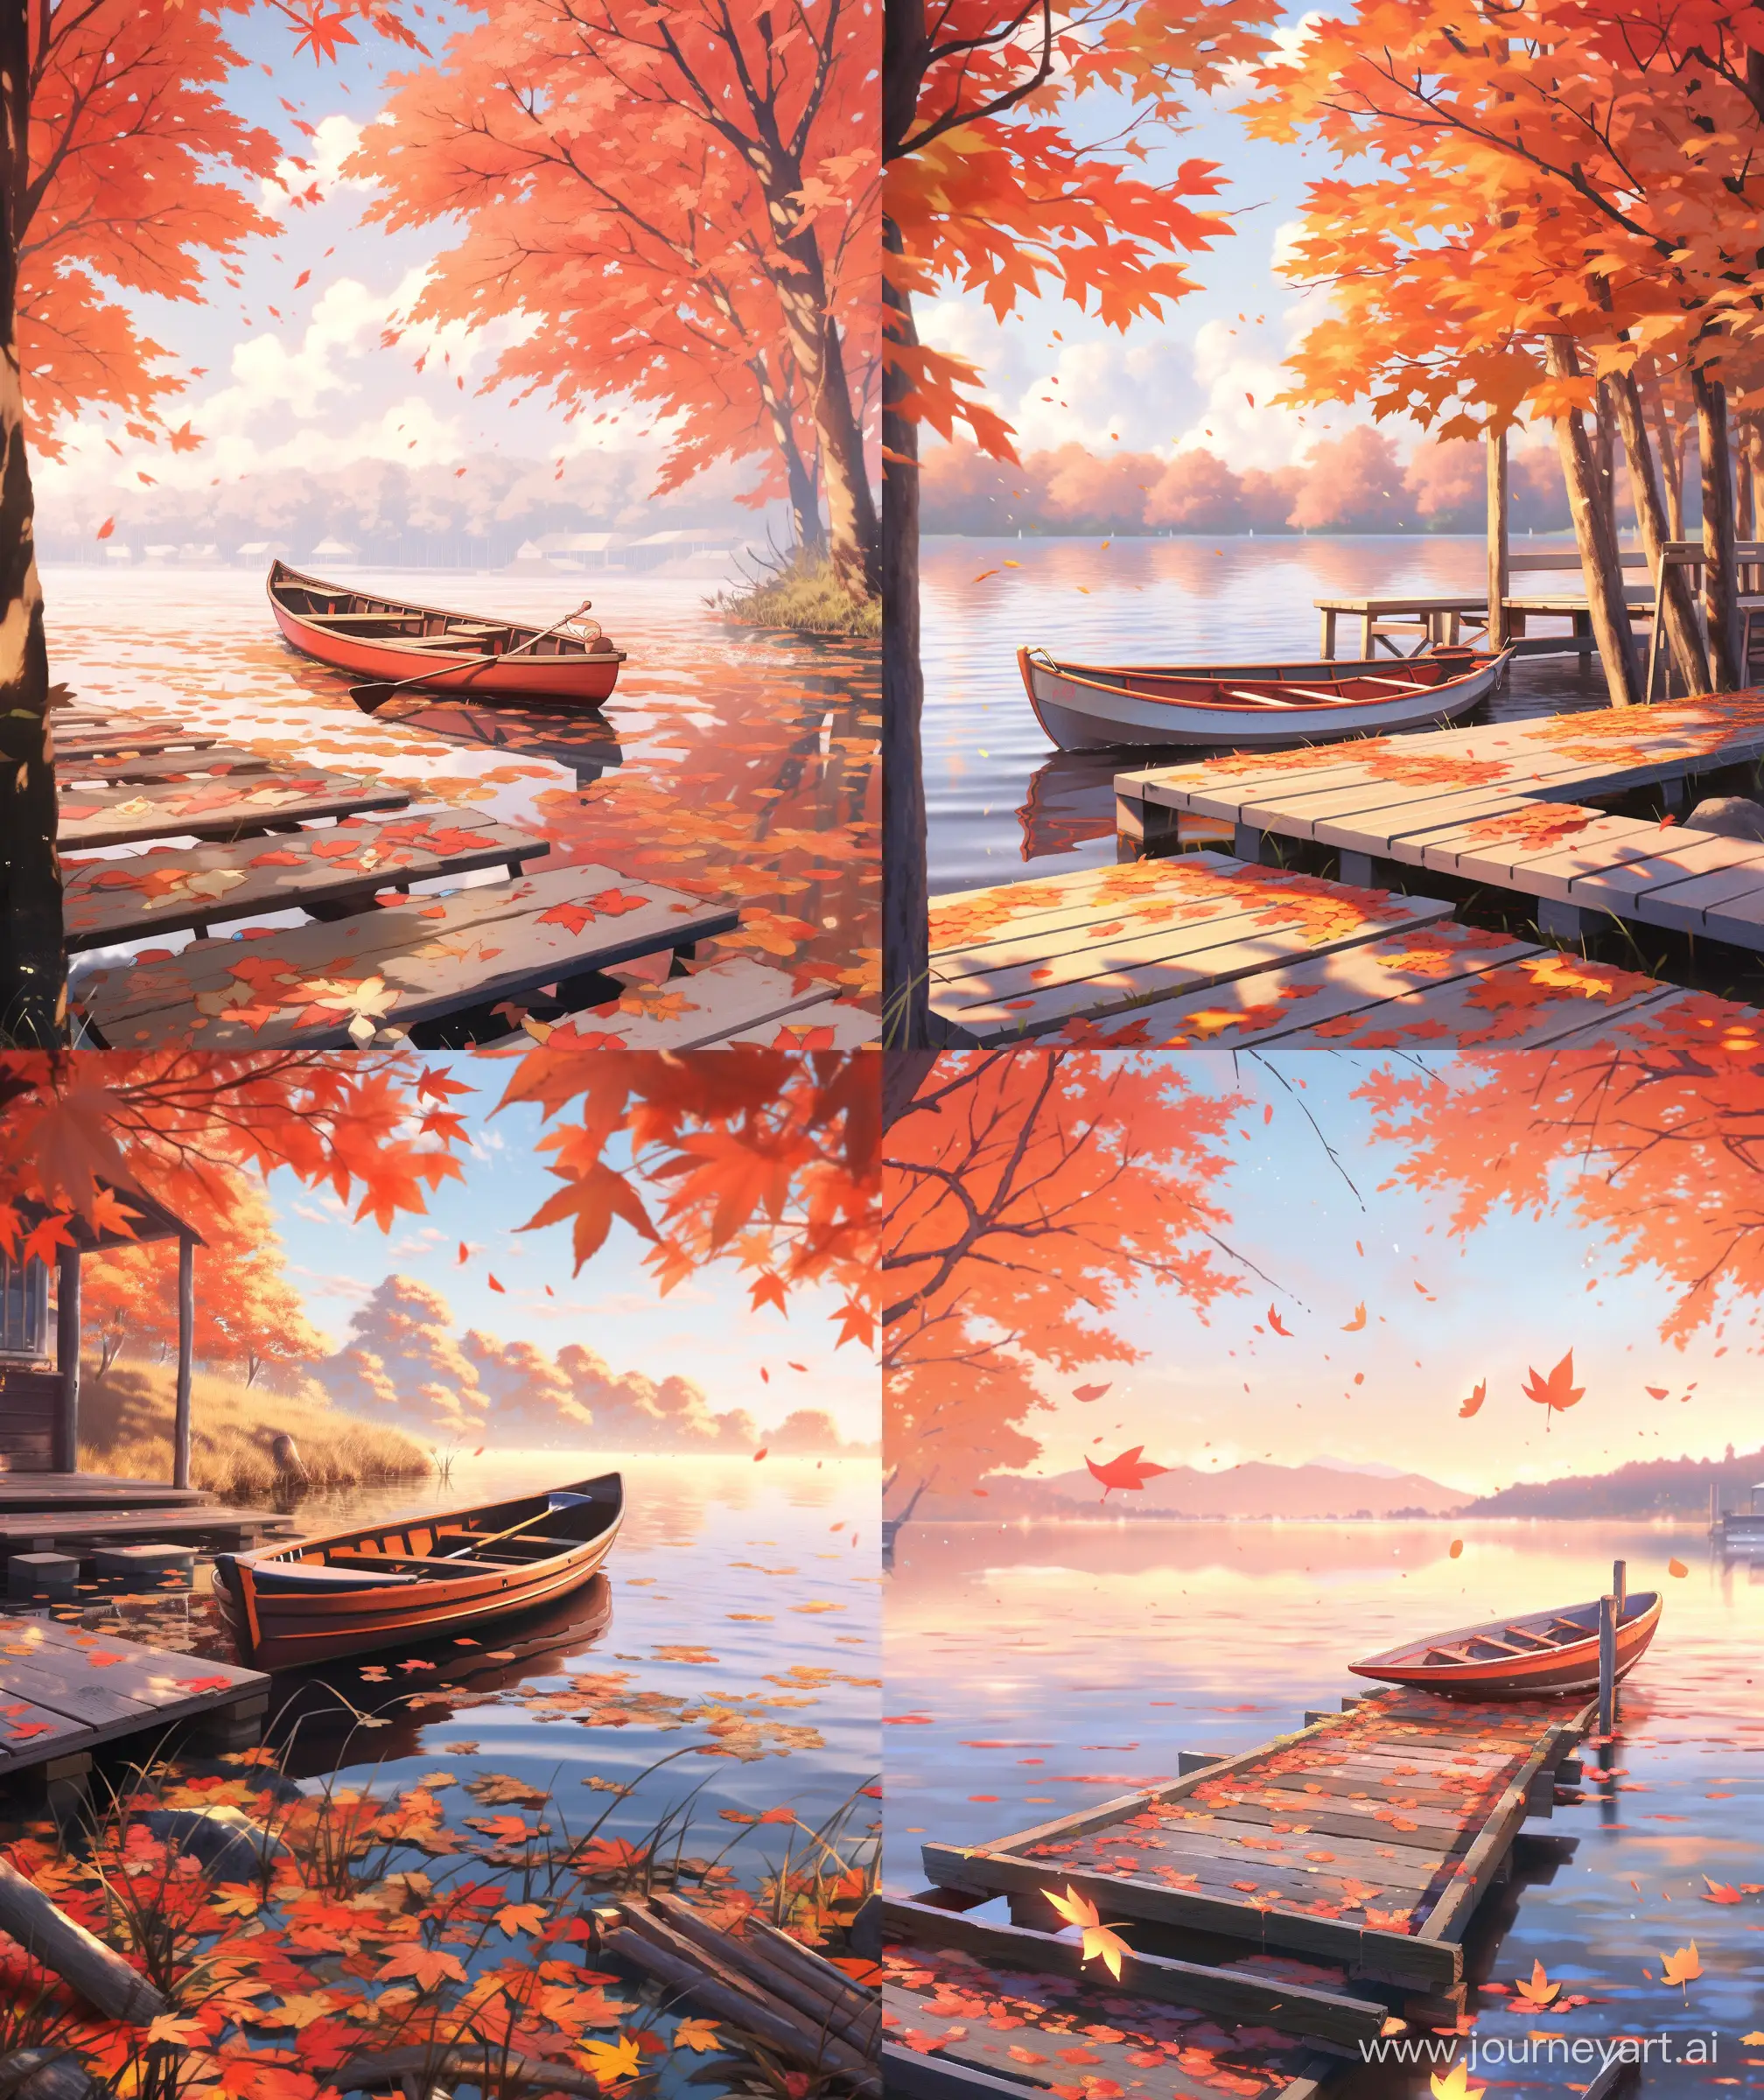 Anime-Scenery-Lake-House-in-Autumn-with-Cozy-Atmosphere-and-Glistening-Sunlight